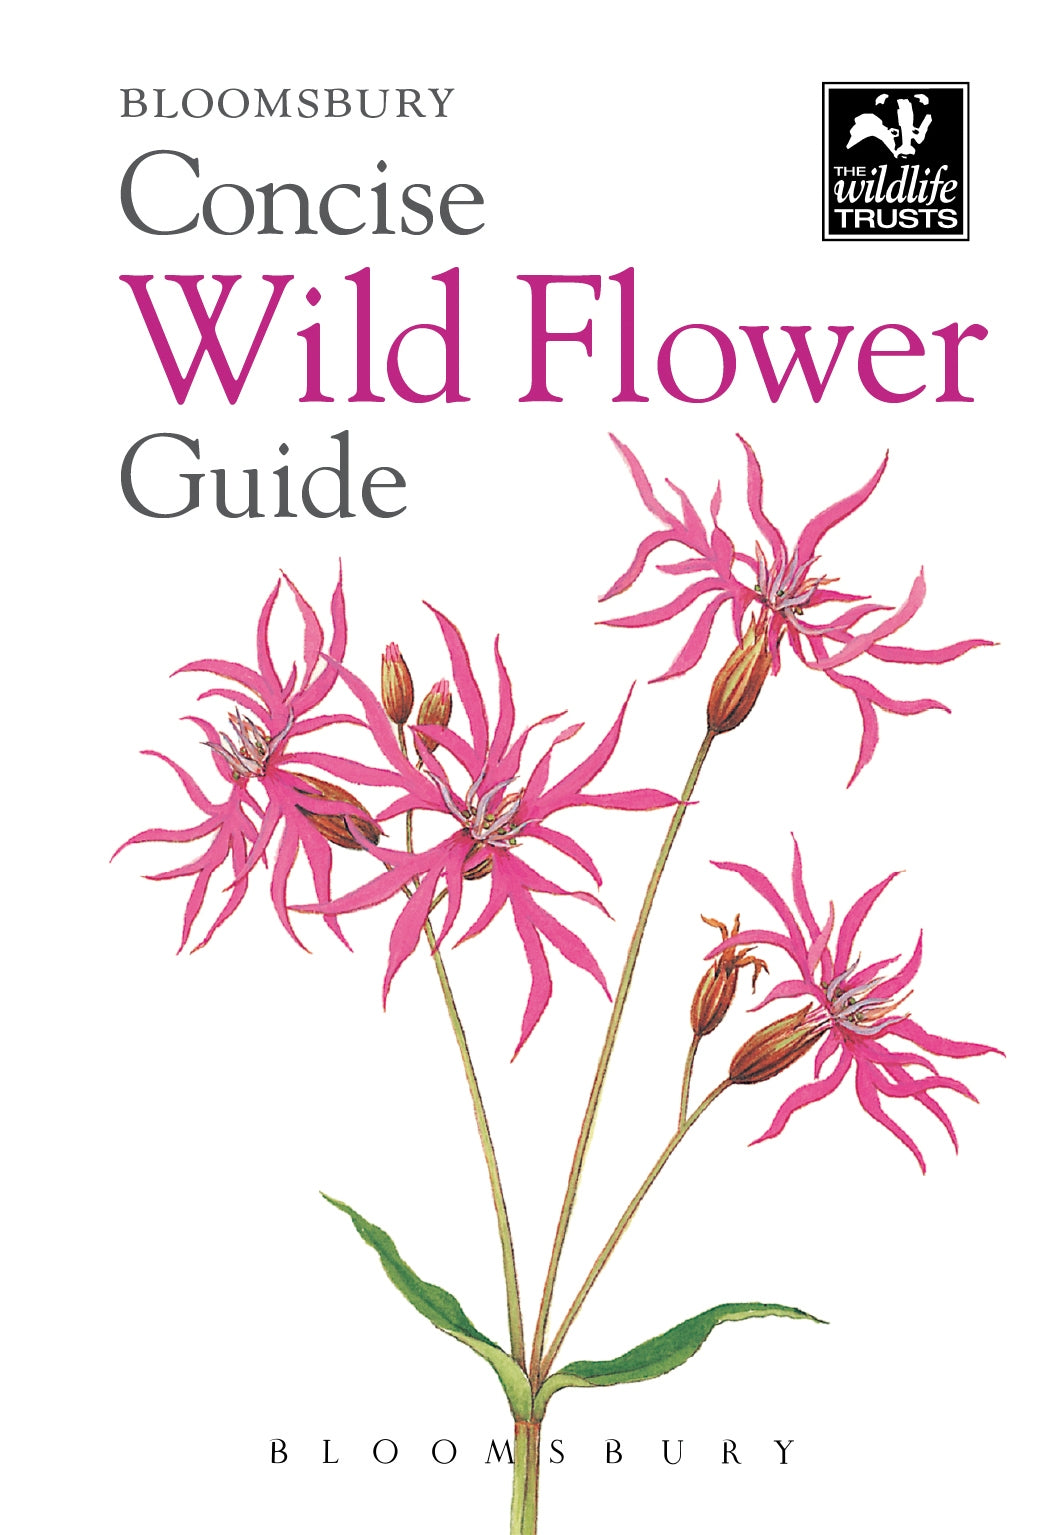 Bloomsbury concise guide -  wild flower